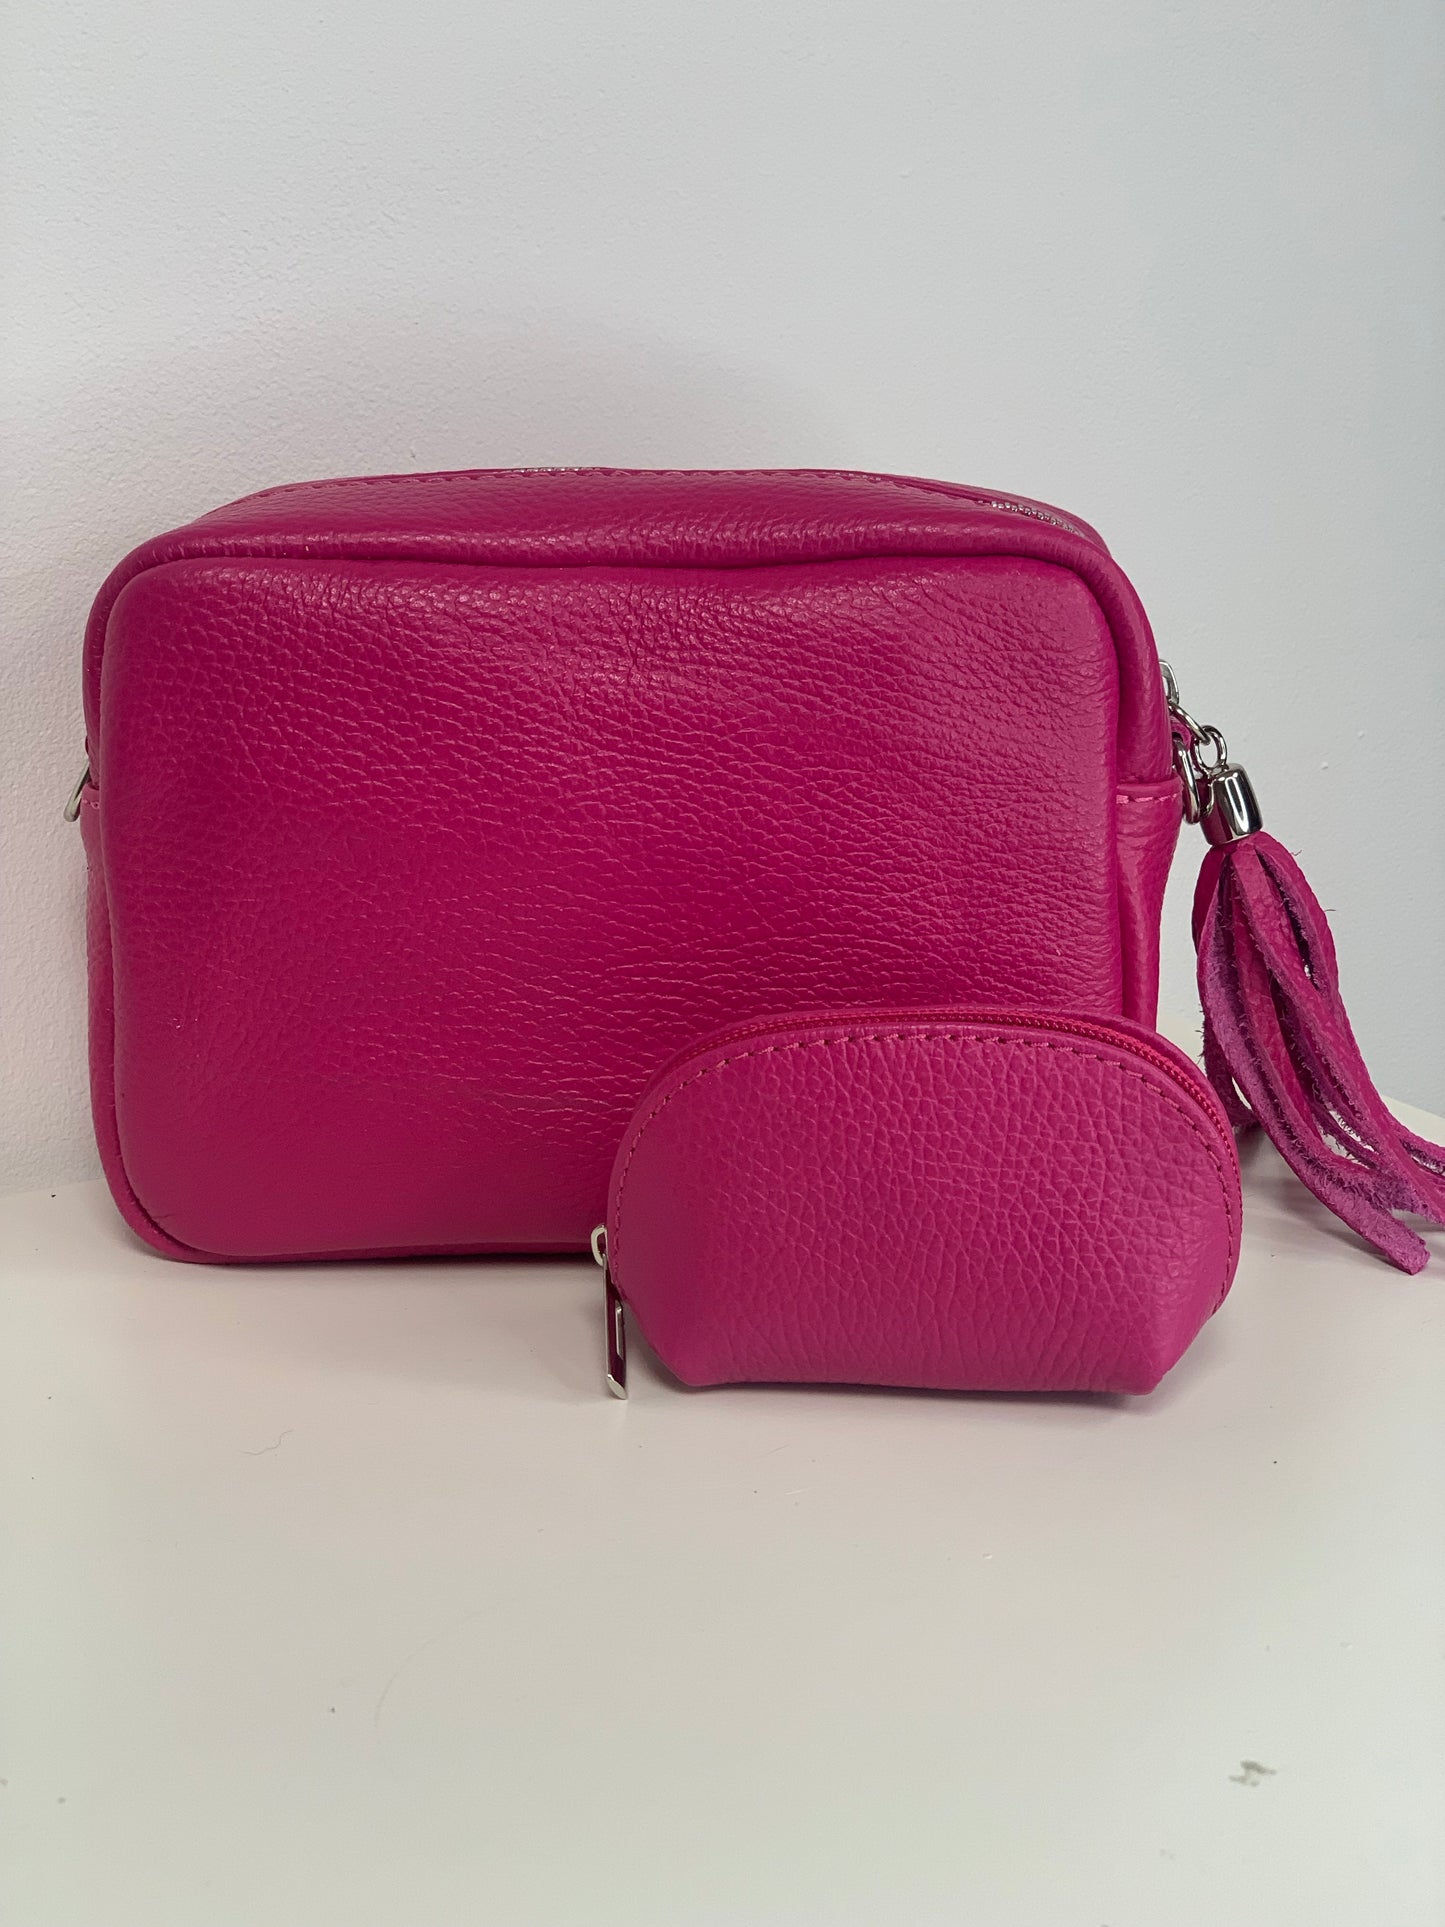 Pink Camera Bag - Real Leather